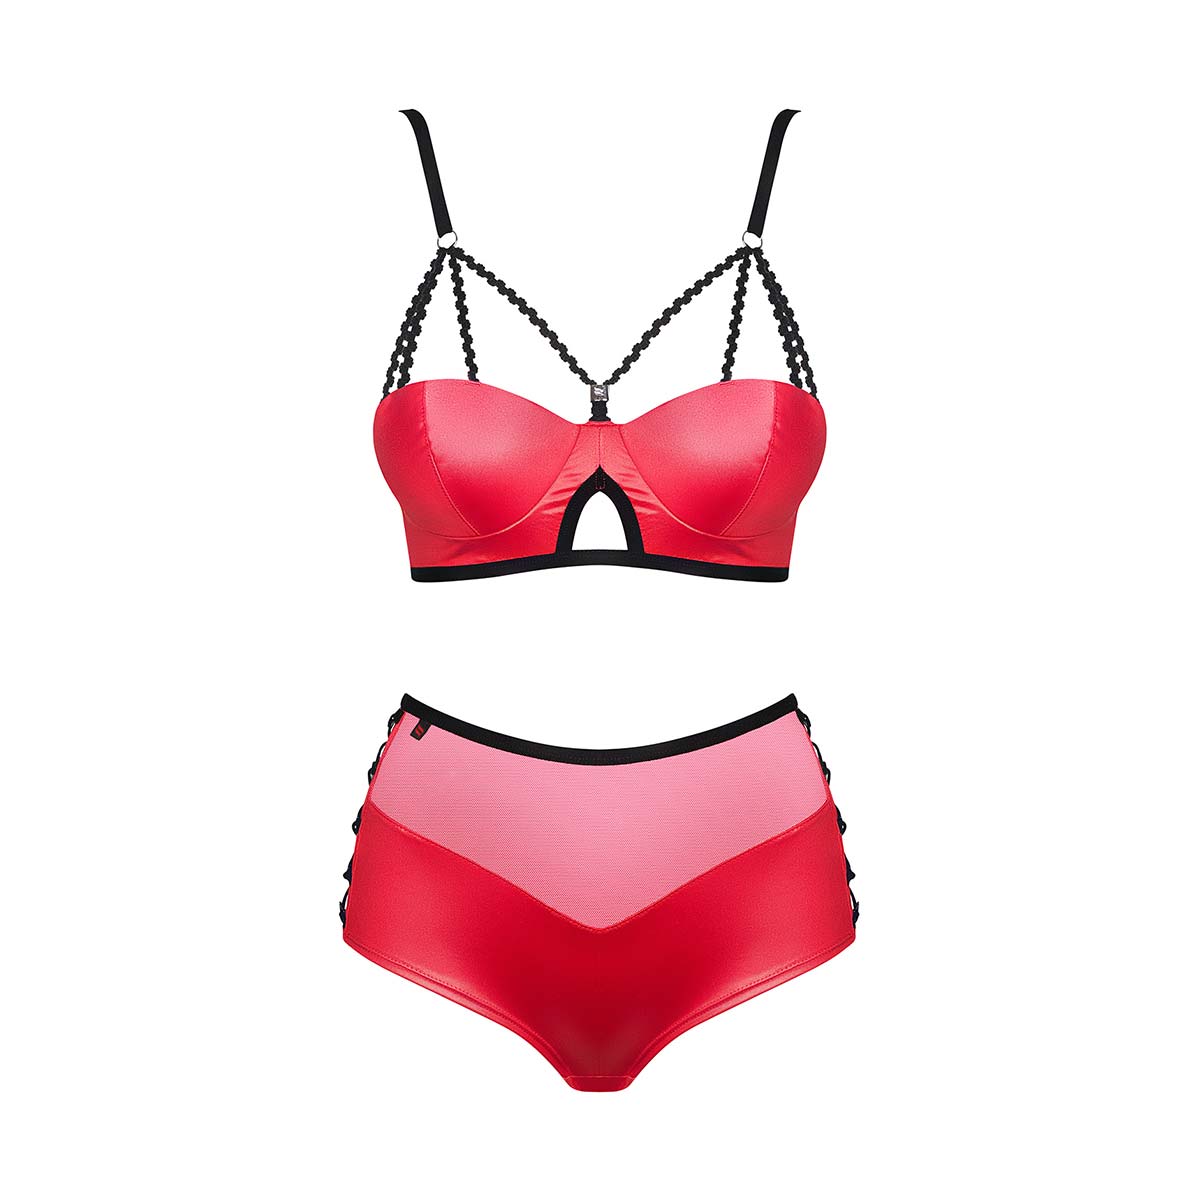 Completo intimo sexy in similpelle - Rosso - Ayay 39